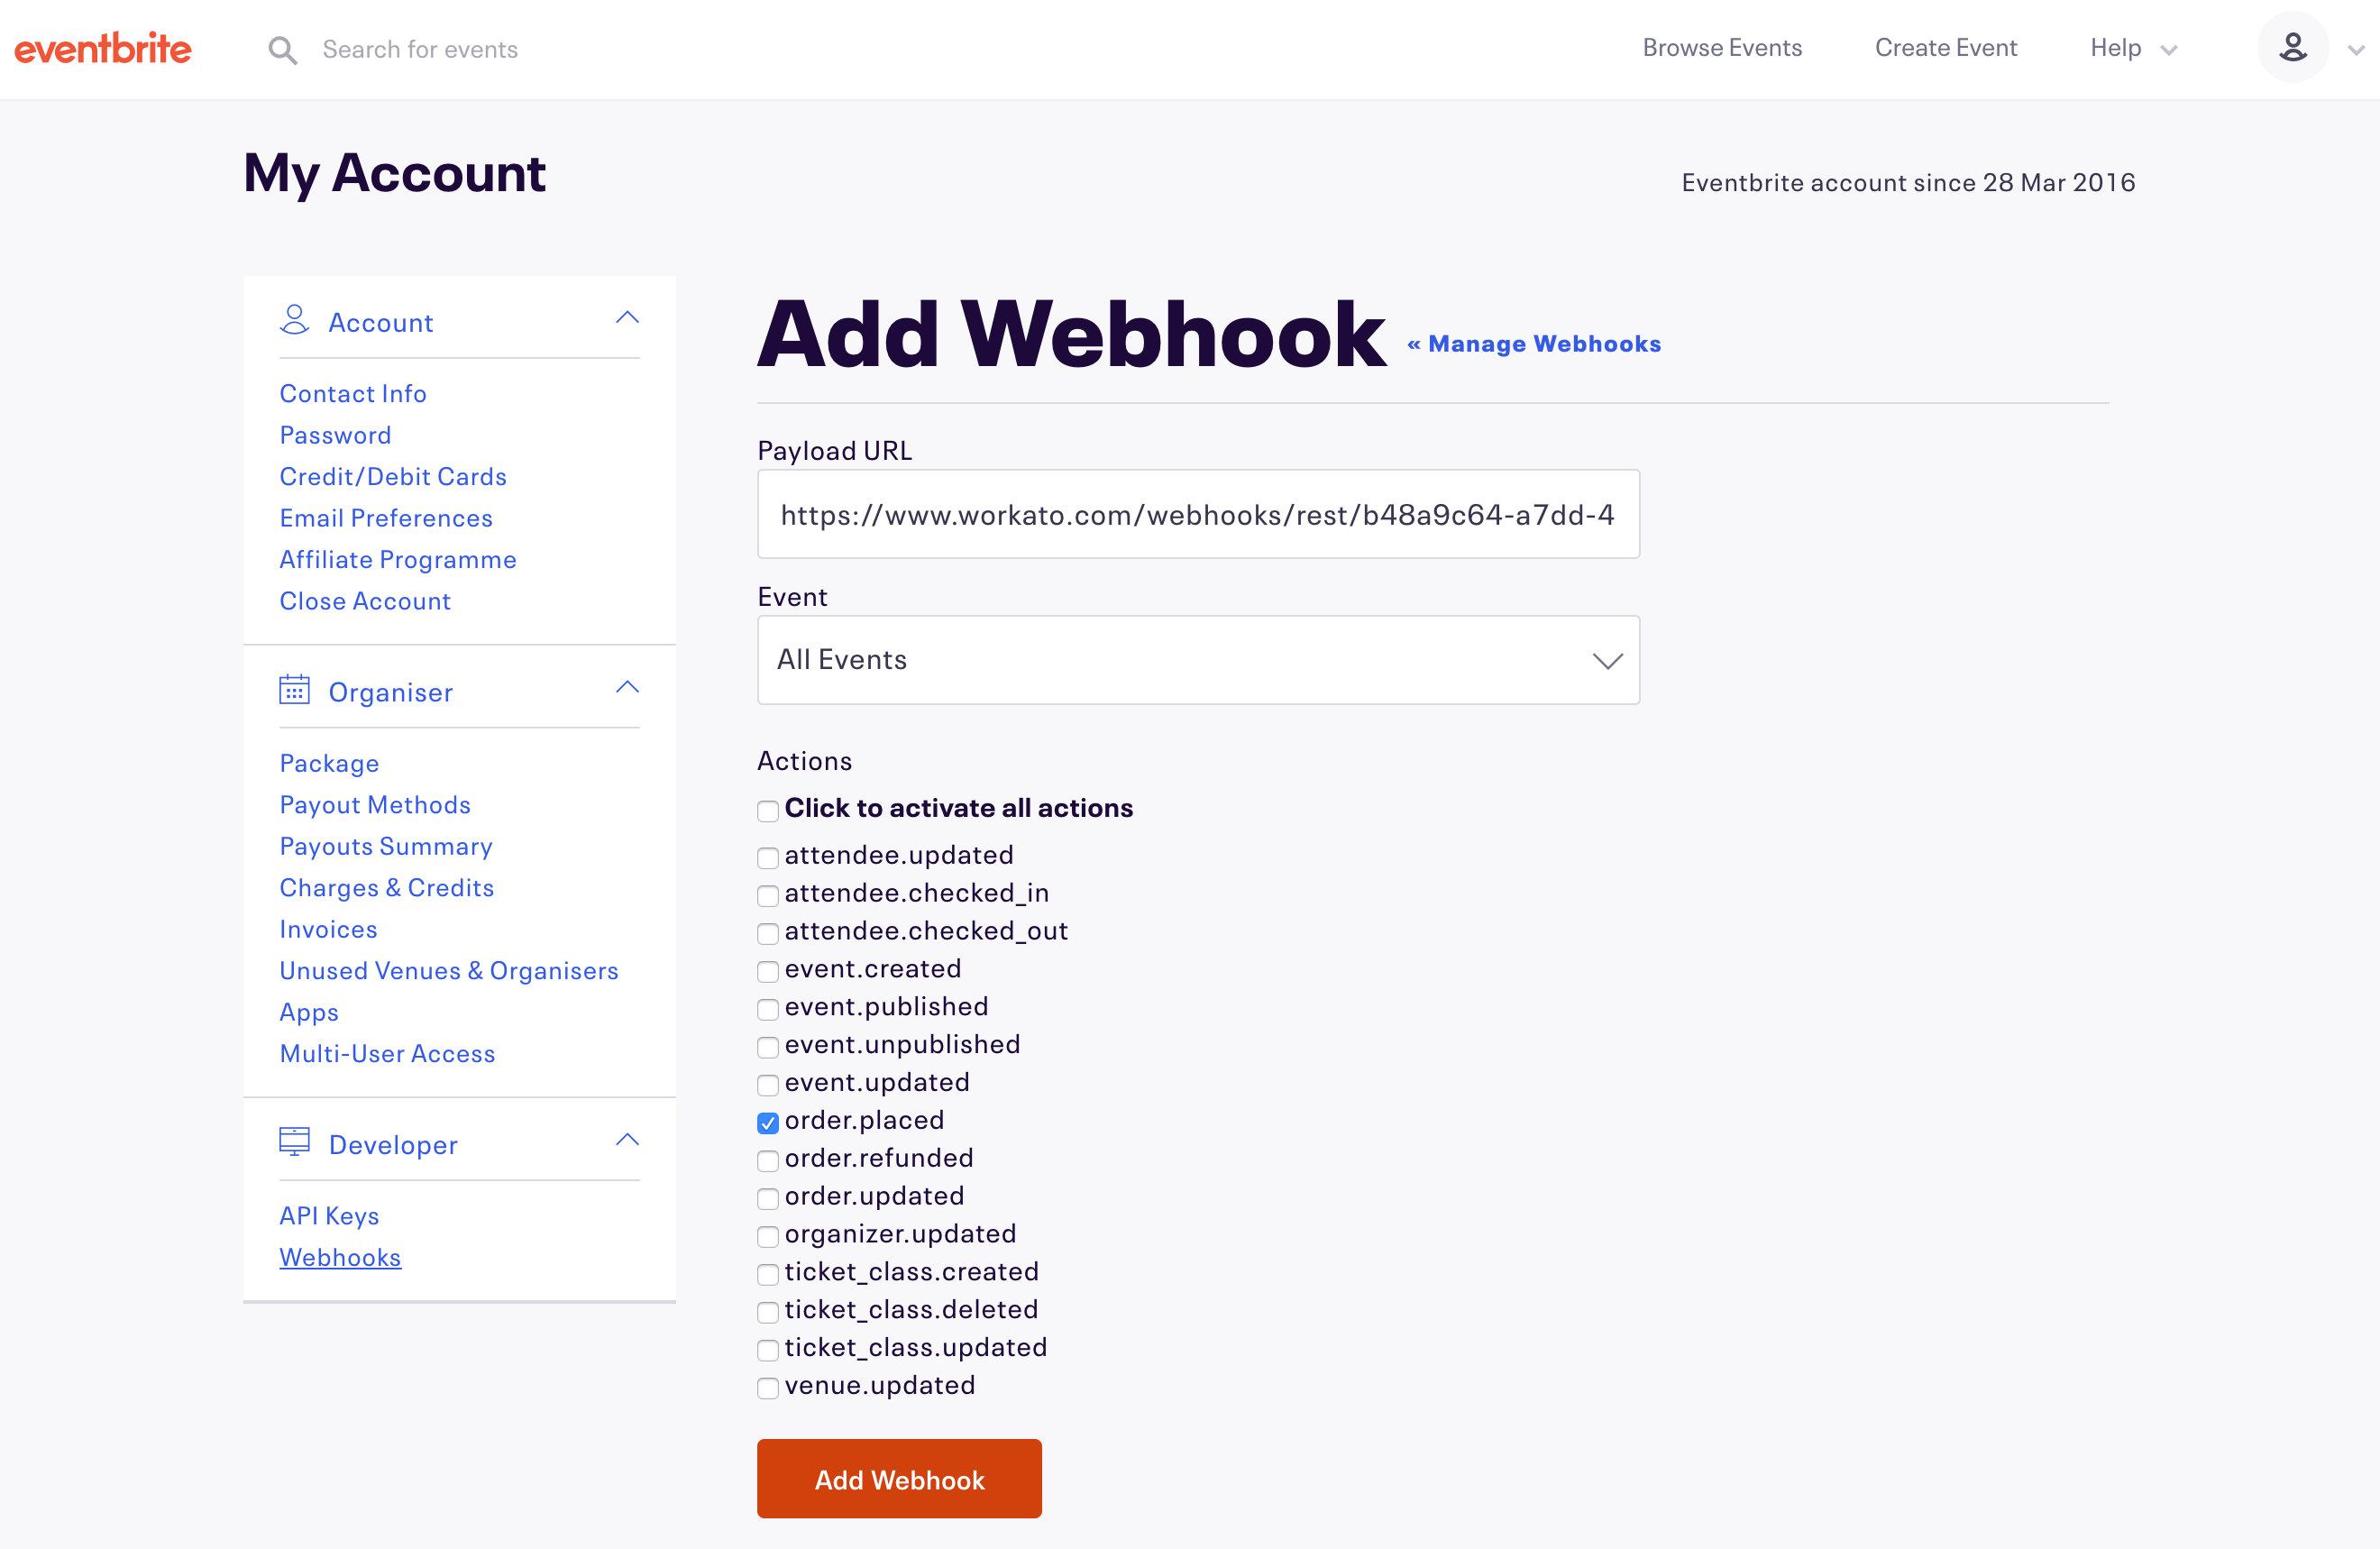 Add a webhook in Eventbrite to send data to the webhook trigger